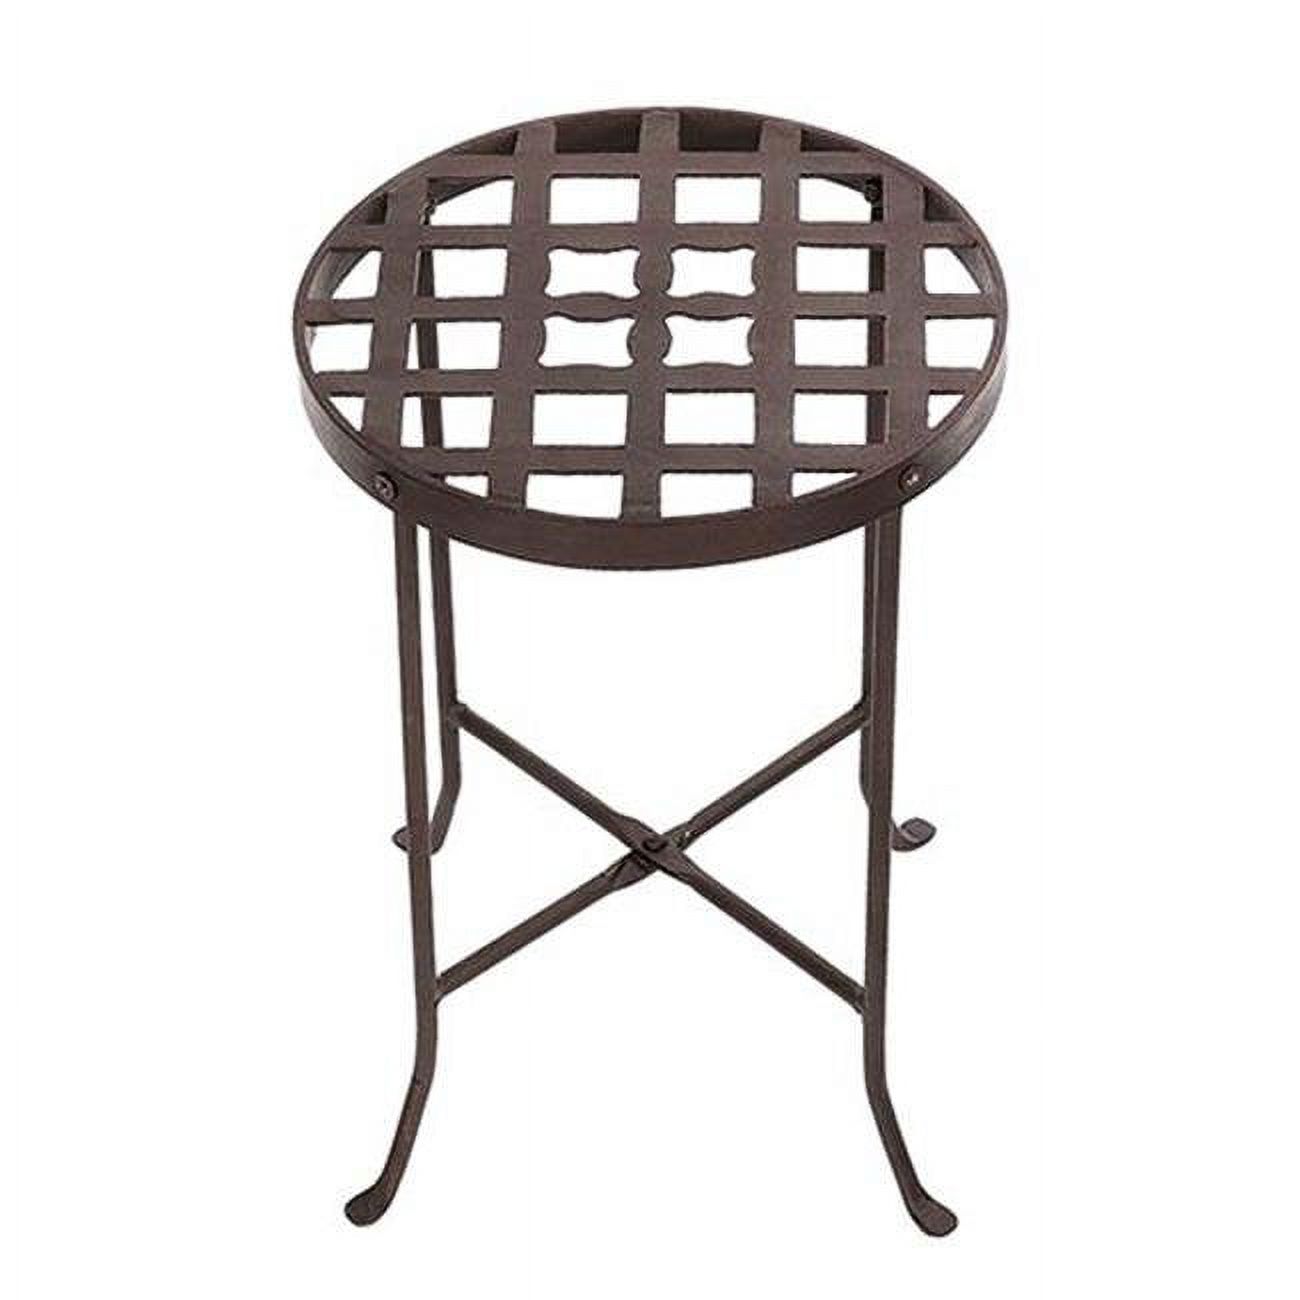 Achla FB-22 Lowers Plant Stand II in Roman Bronze Powder Coated - image 1 of 2